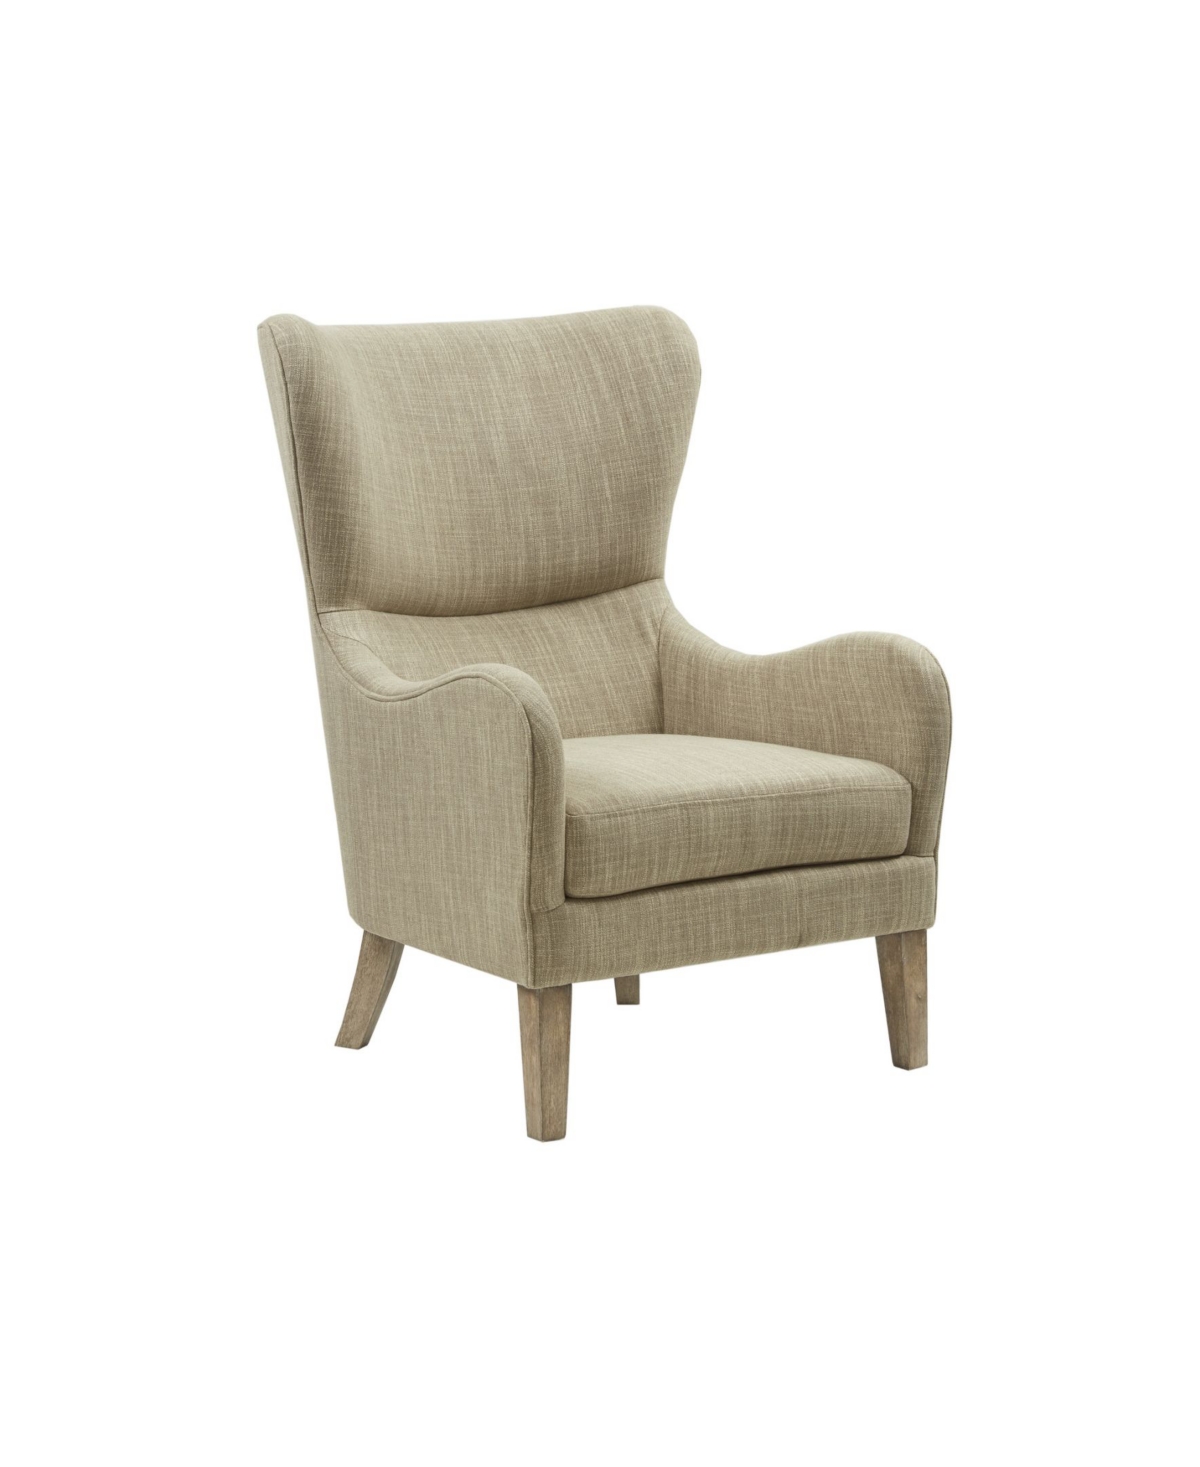 Madison Park Arianna Fabric Swoop Wing Chair In Taupe